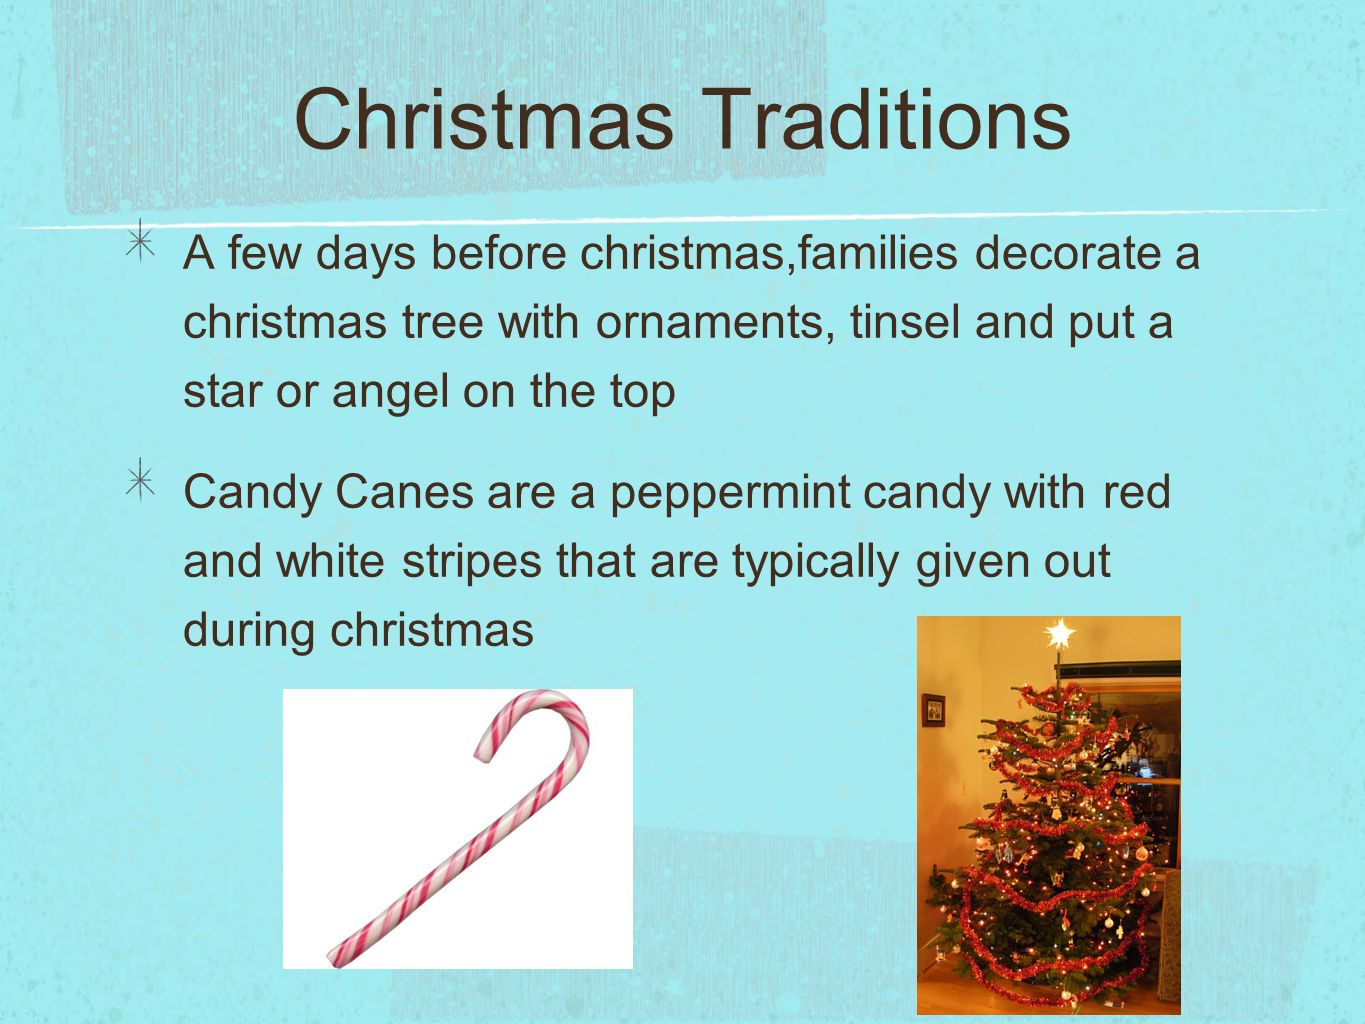 Christmas Traditions A few days before christmas,families decorate a christmas tree with ornaments, tinsel and put a star or angel on the top Candy Canes are a peppermint candy with red and white stripes that are typically given out during christmas